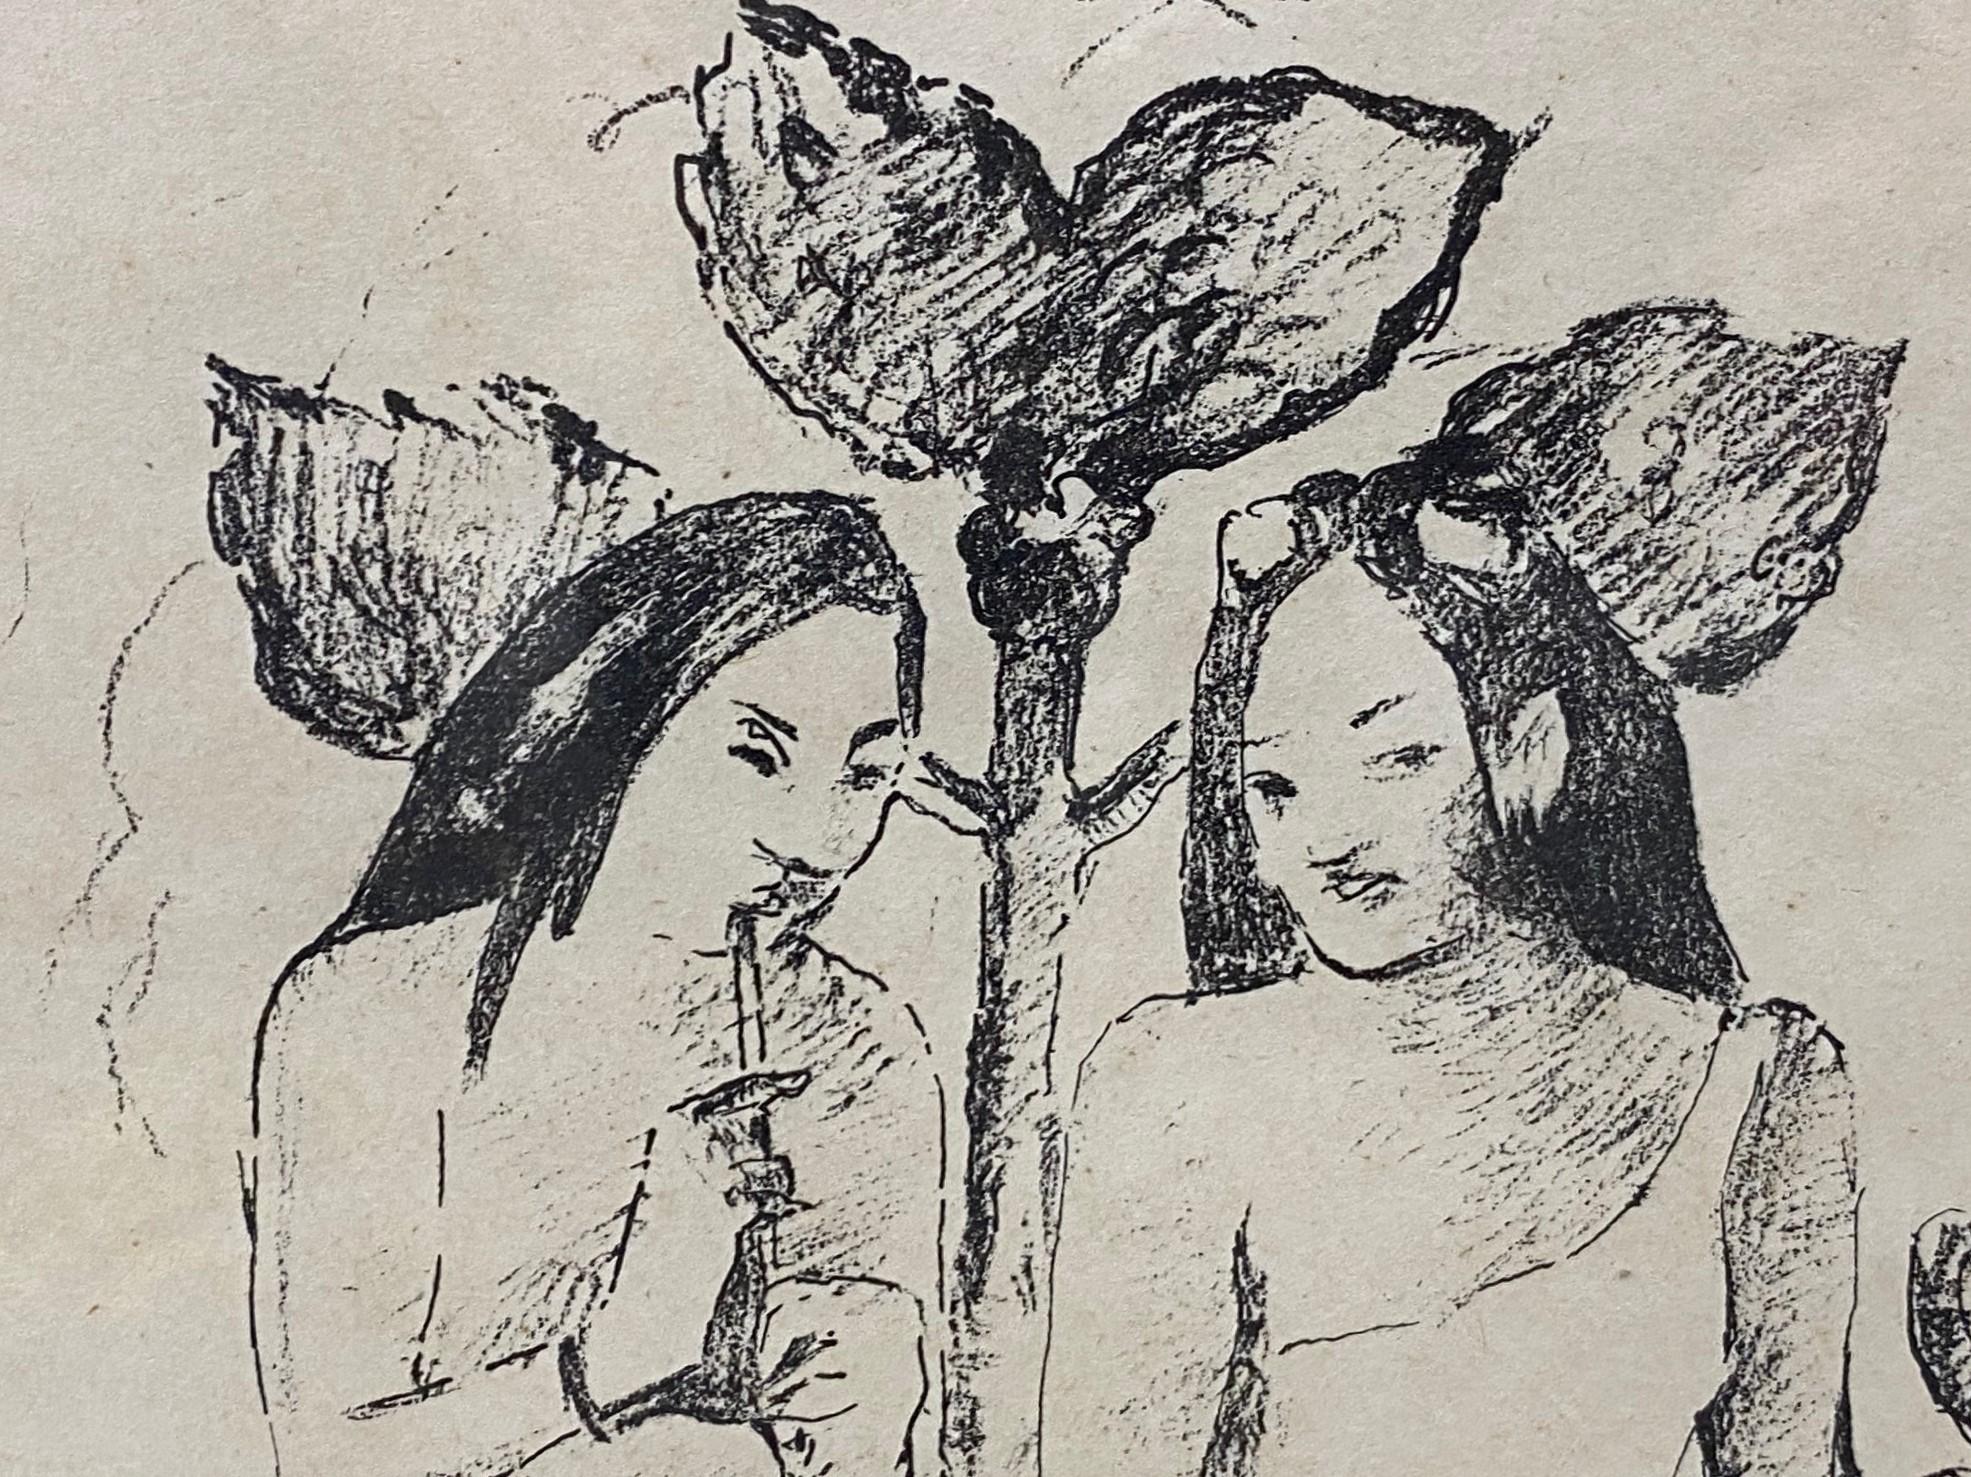 Wood Paul Gauguin Deux Femmes Maories Accroupies Limited Edition Lithograph Print For Sale